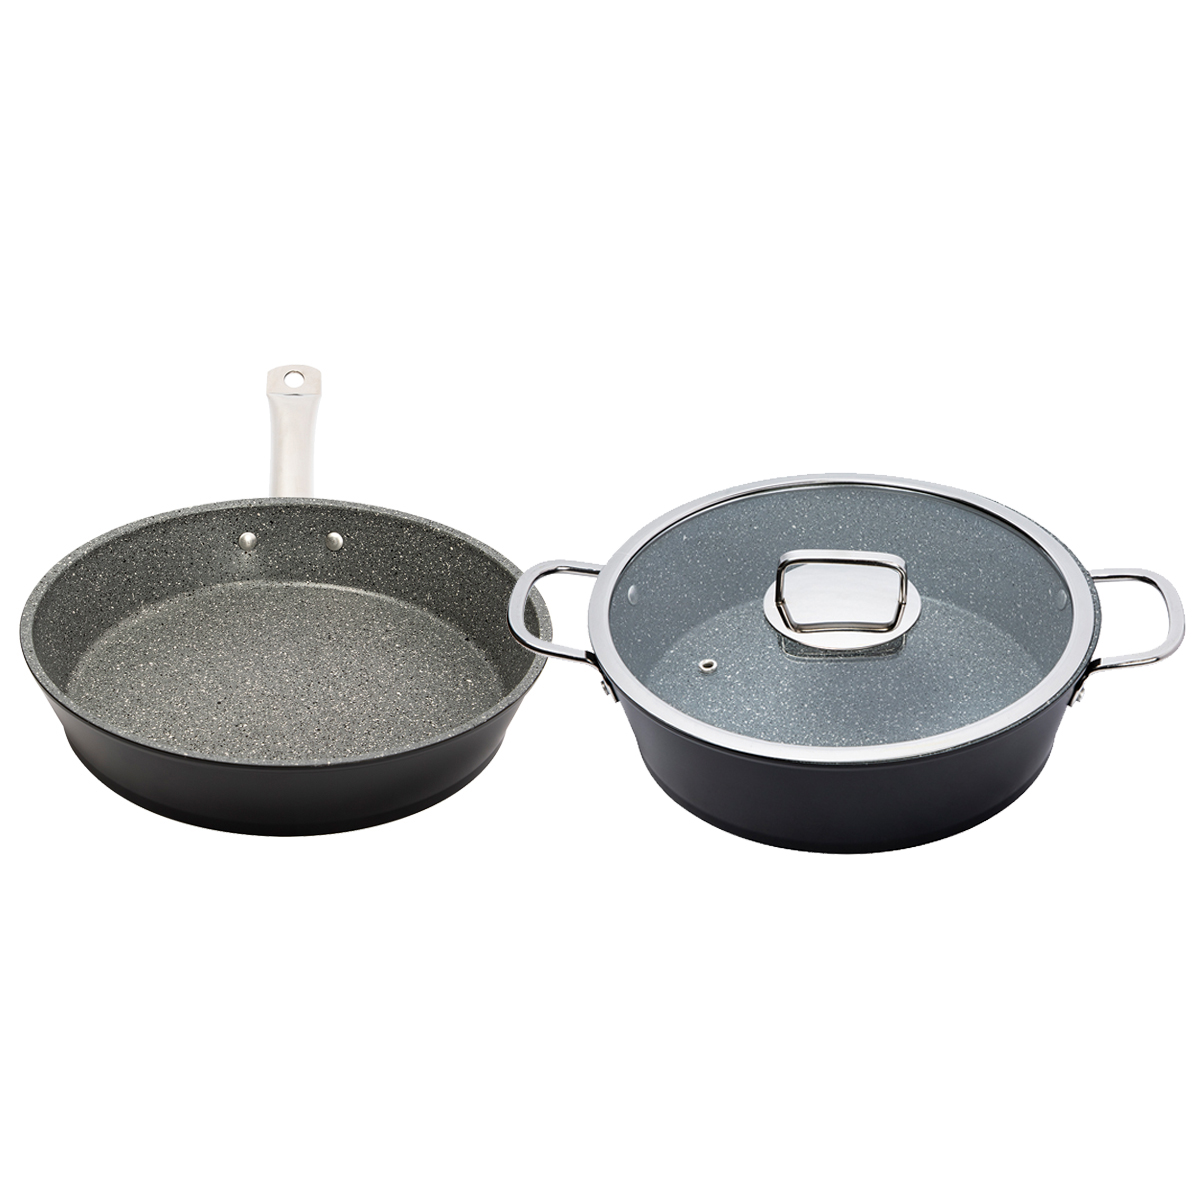 Serenk excellence 3 pieces granite cookware set